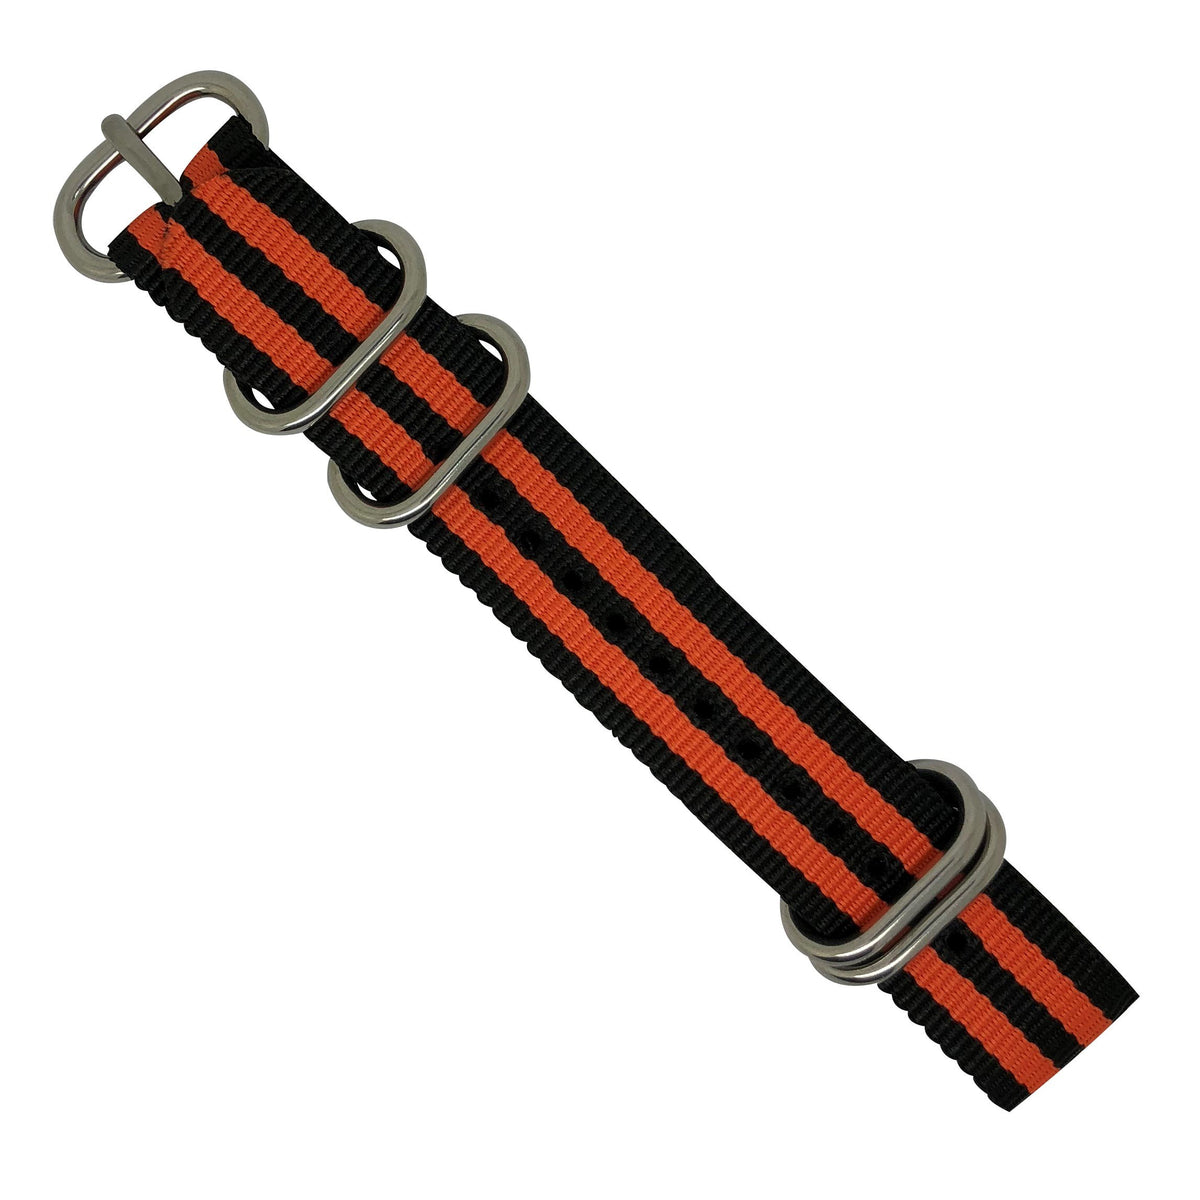 Nylon Zulu Strap in Black Orange Small Stripes with Silver Buckle (24mm) - Nomad Watch Works Malaysia